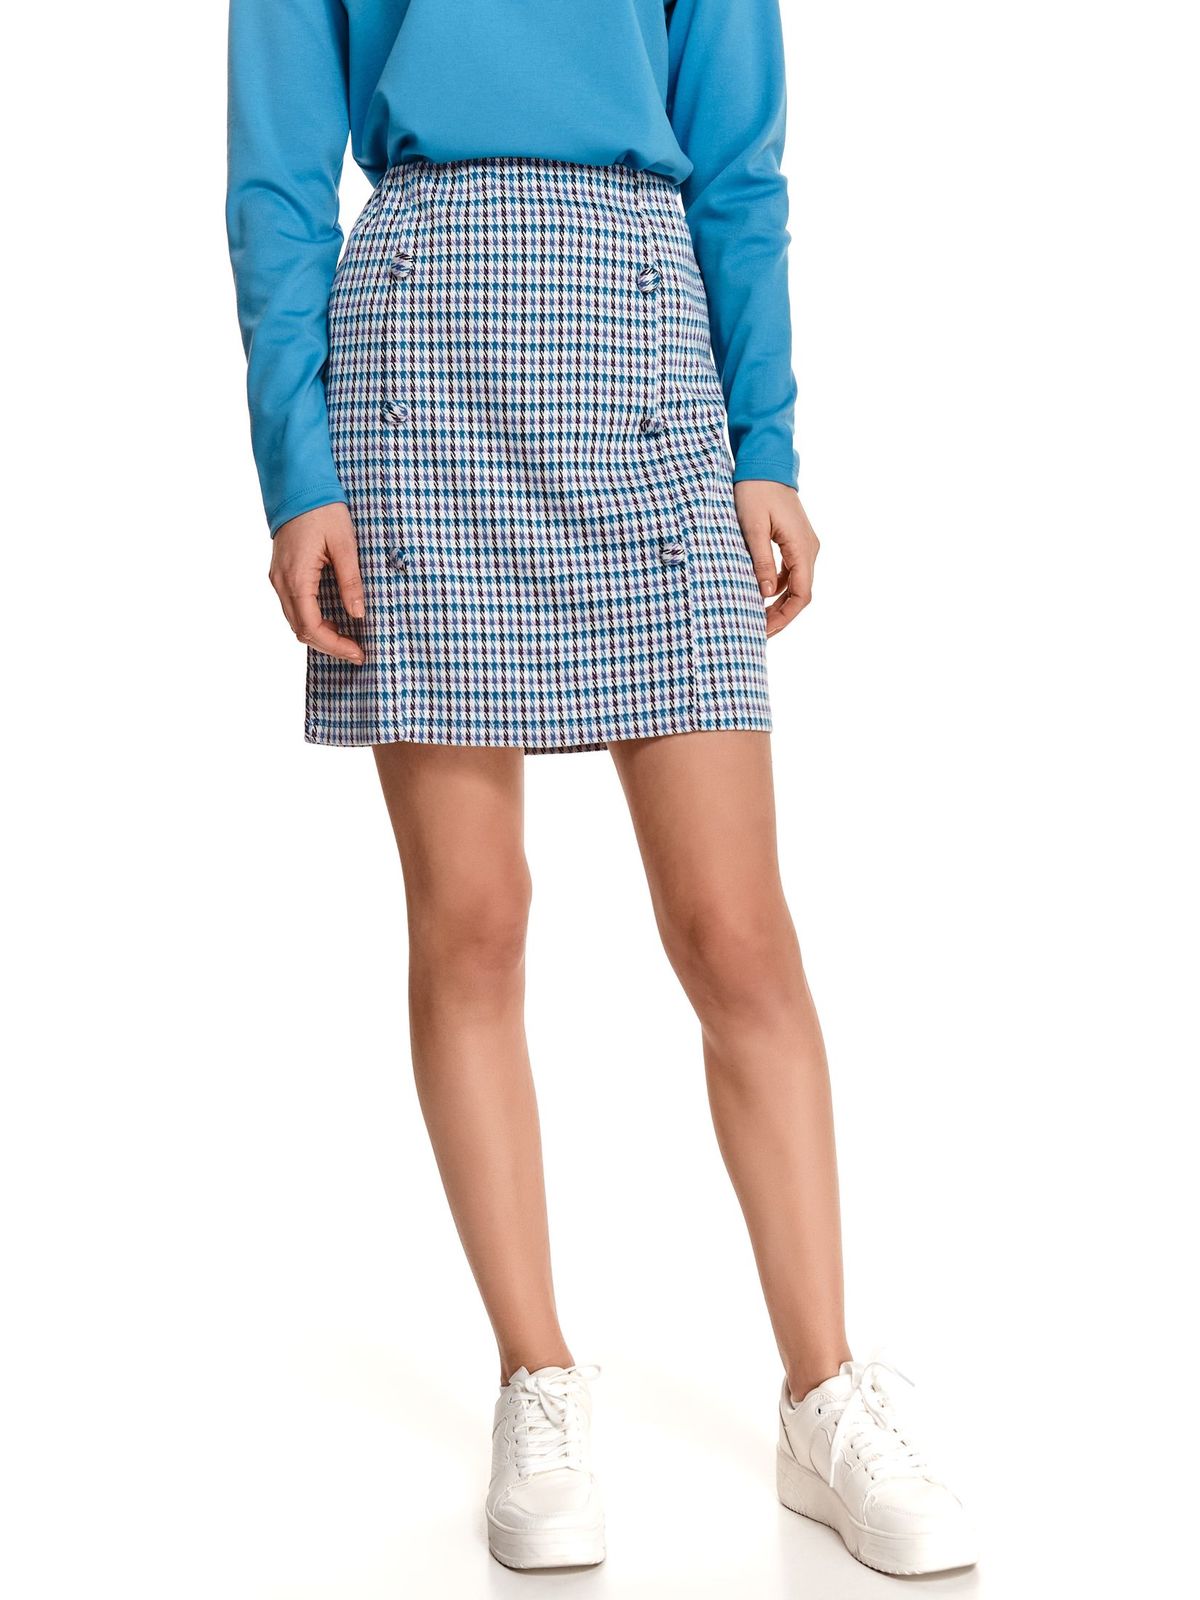 Blue skirt cloth pencil with chequers